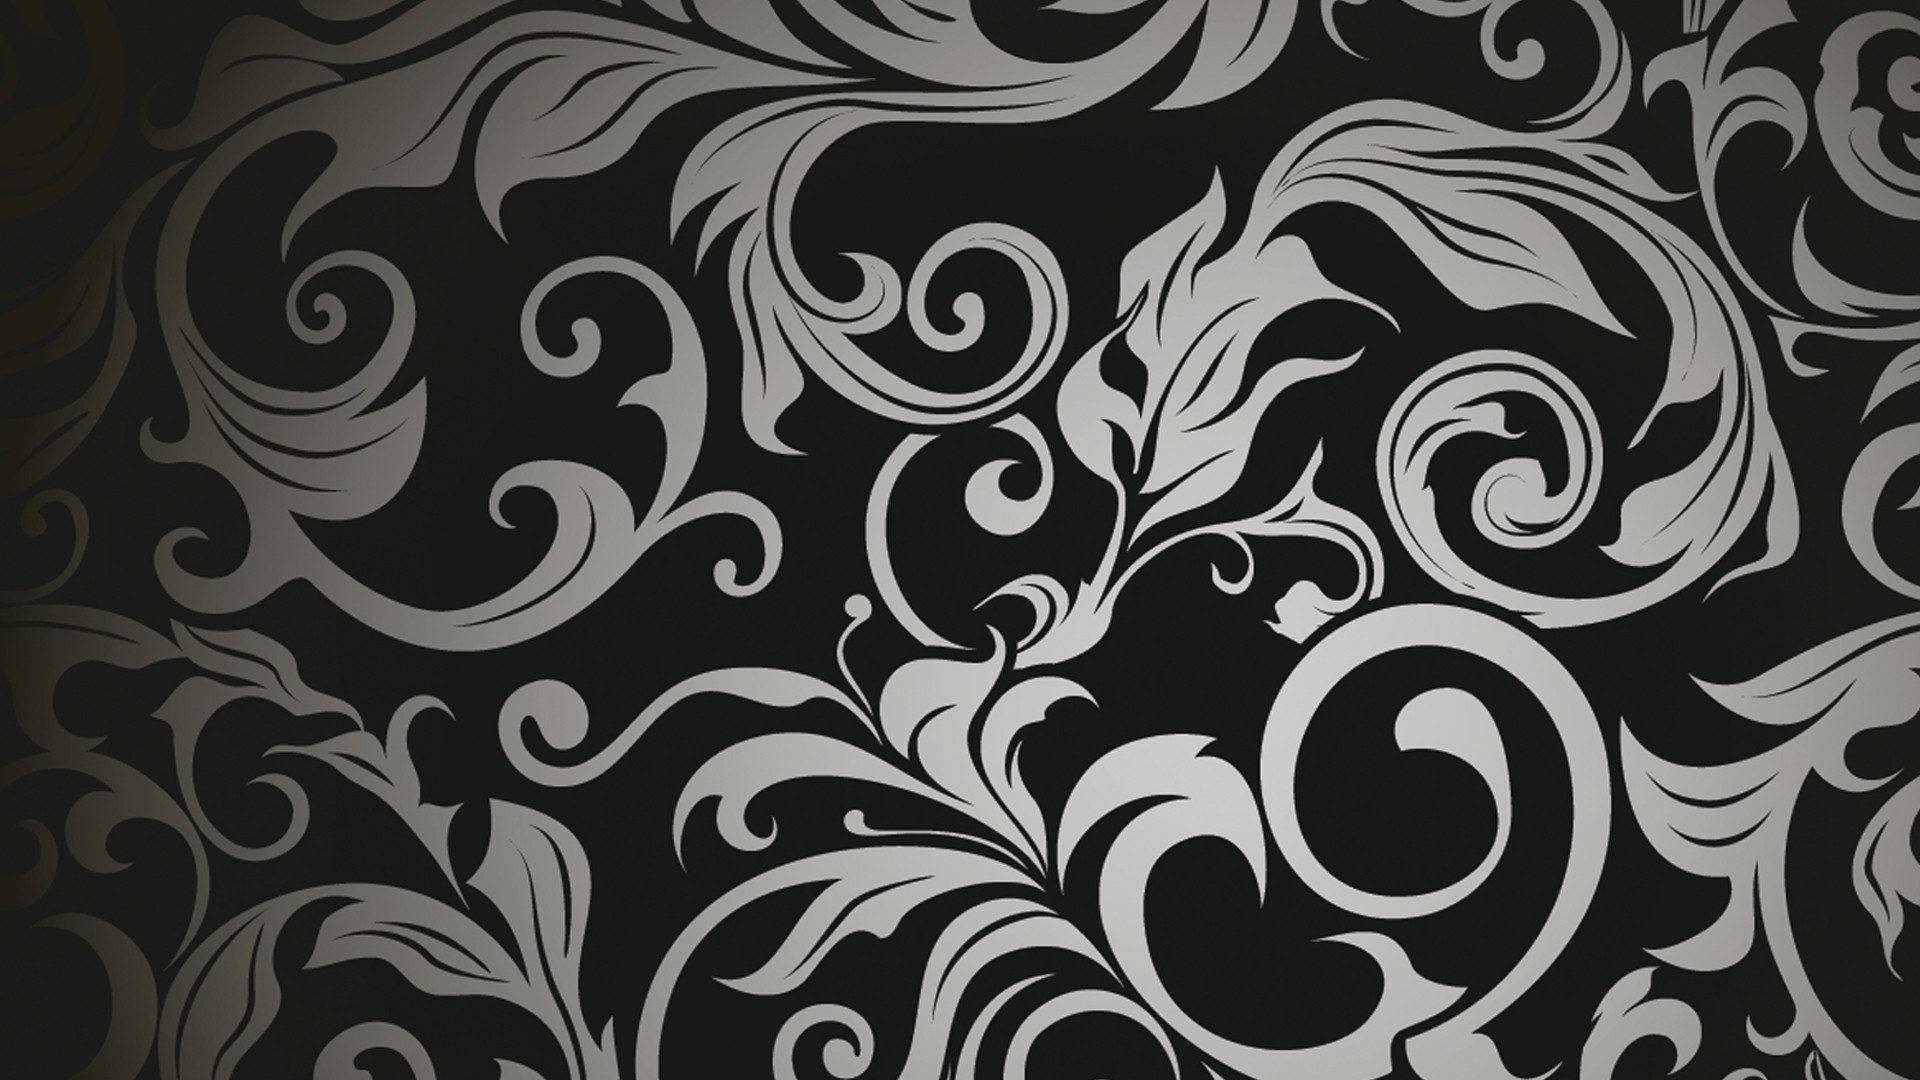 Black And White Vintage Wallpaper Images #c4a • Abstract at ...